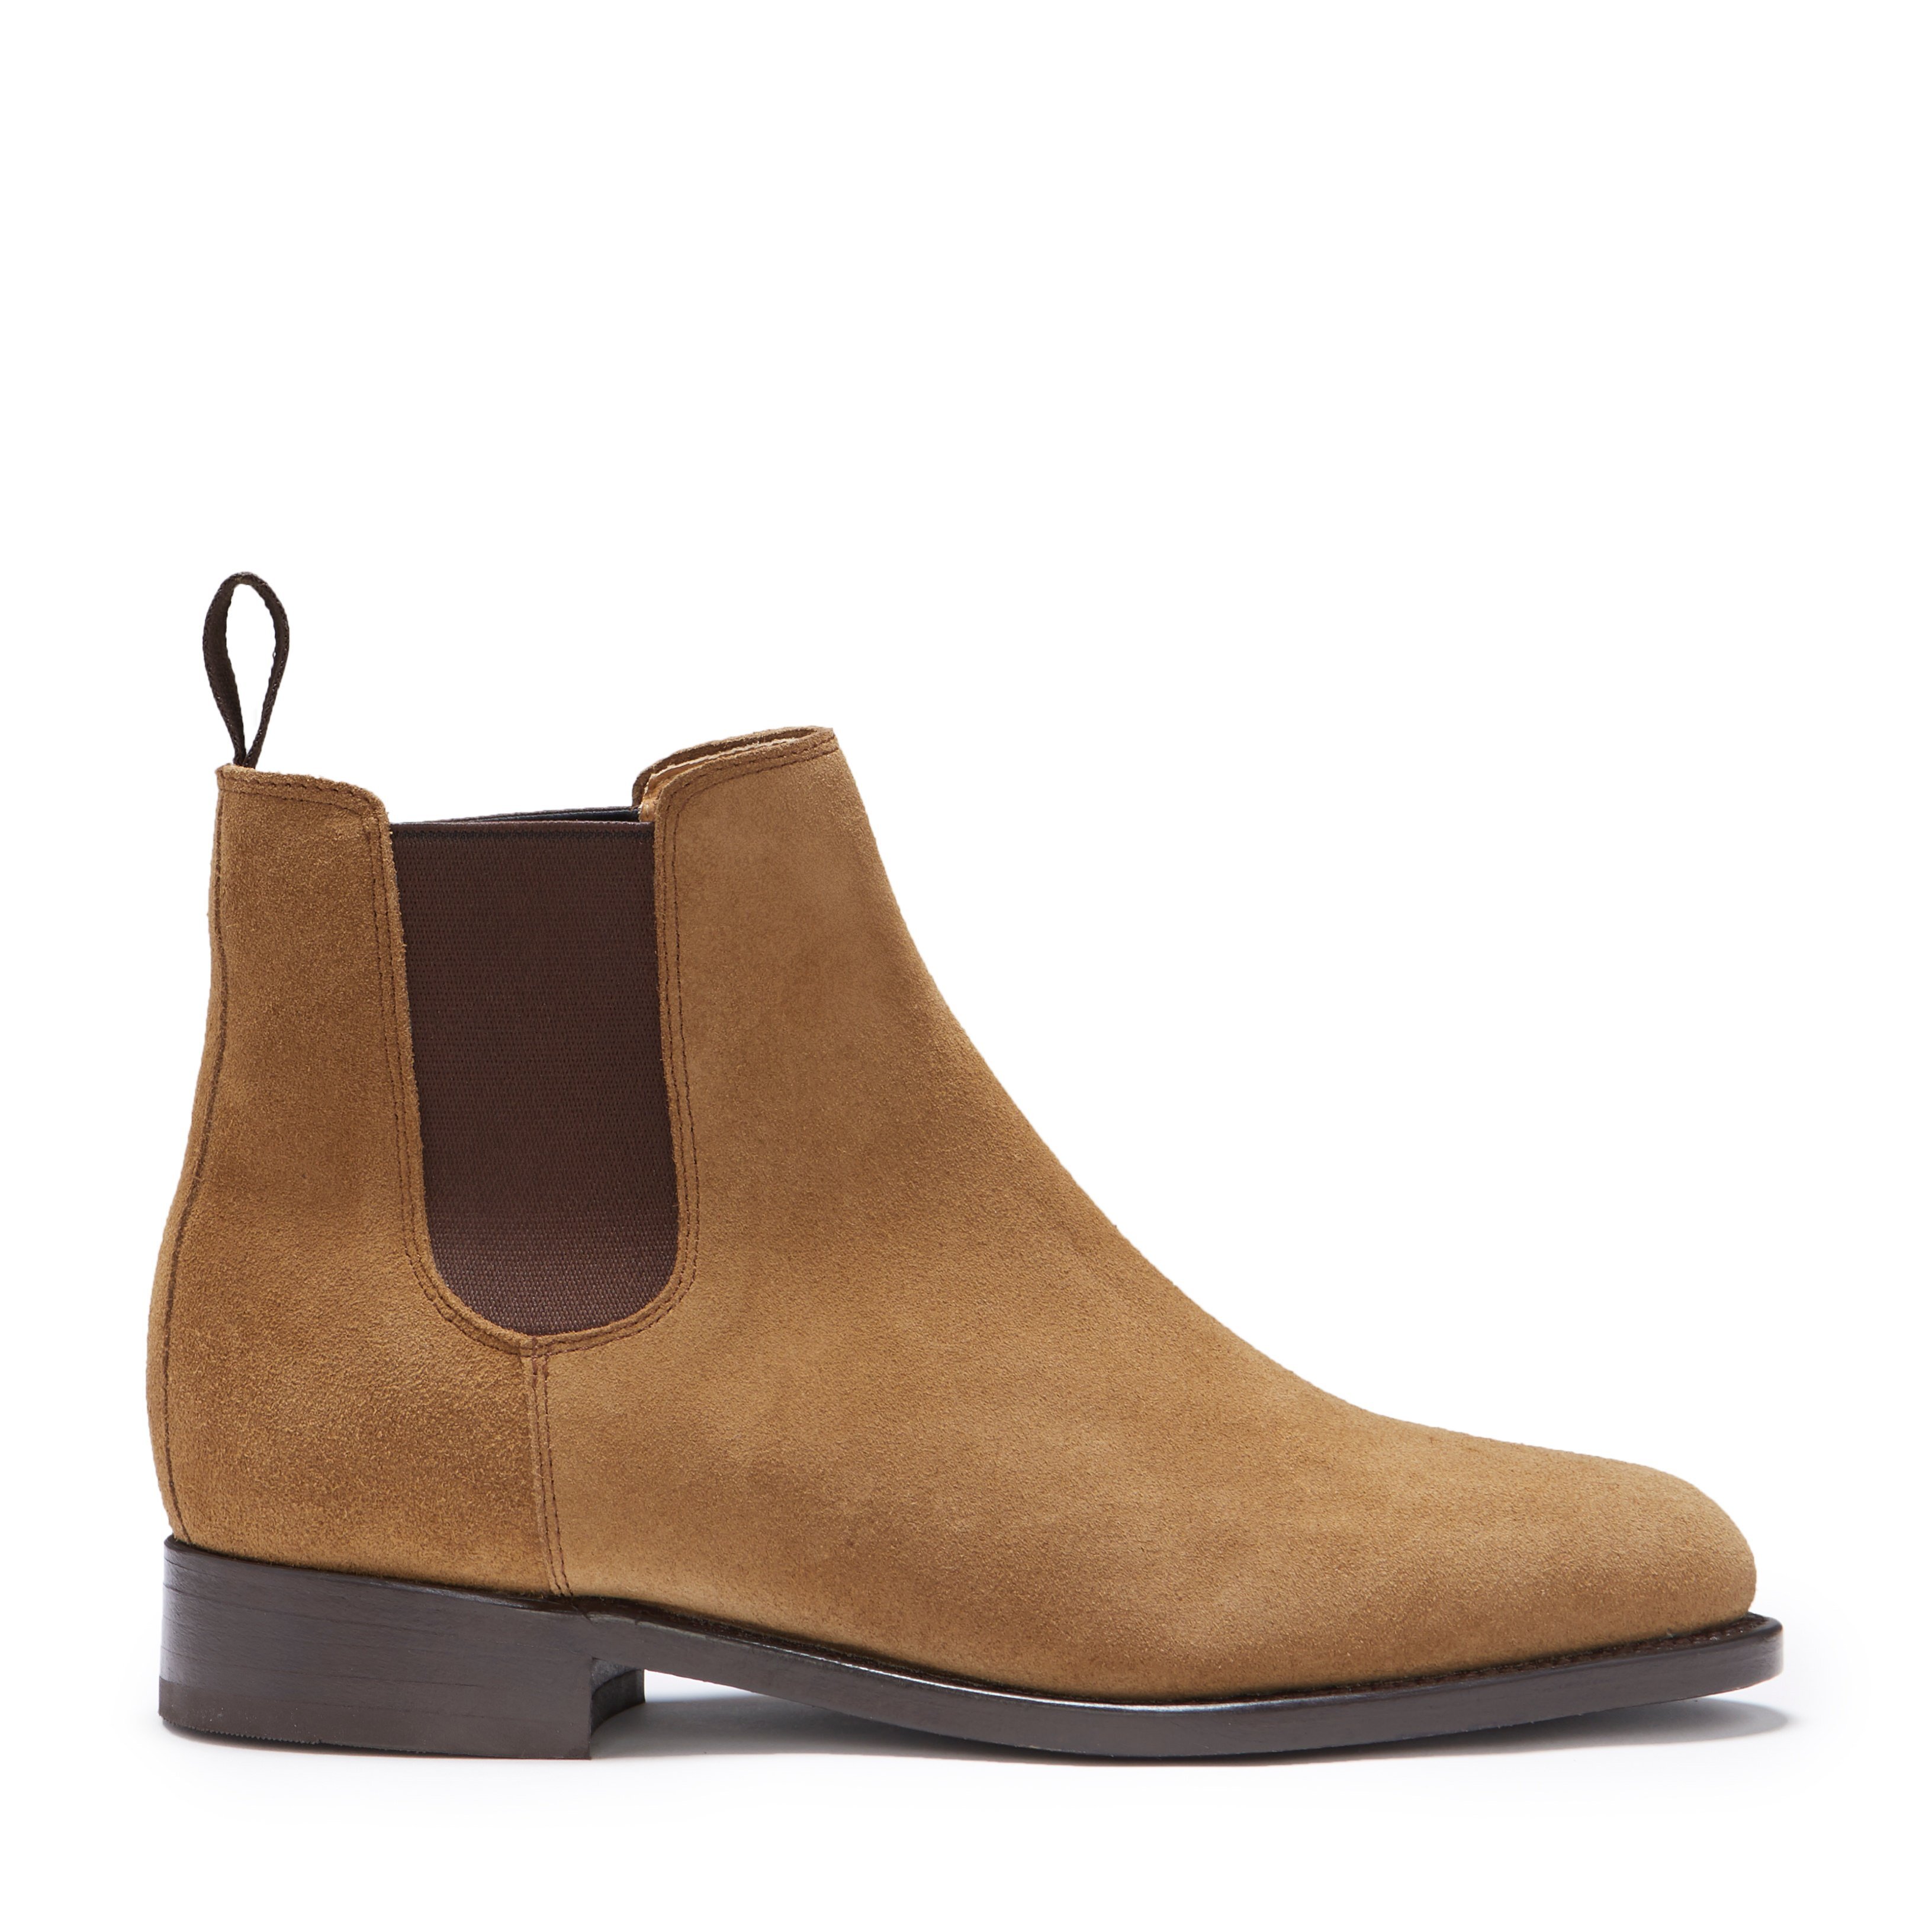 blue chelsea boots womens